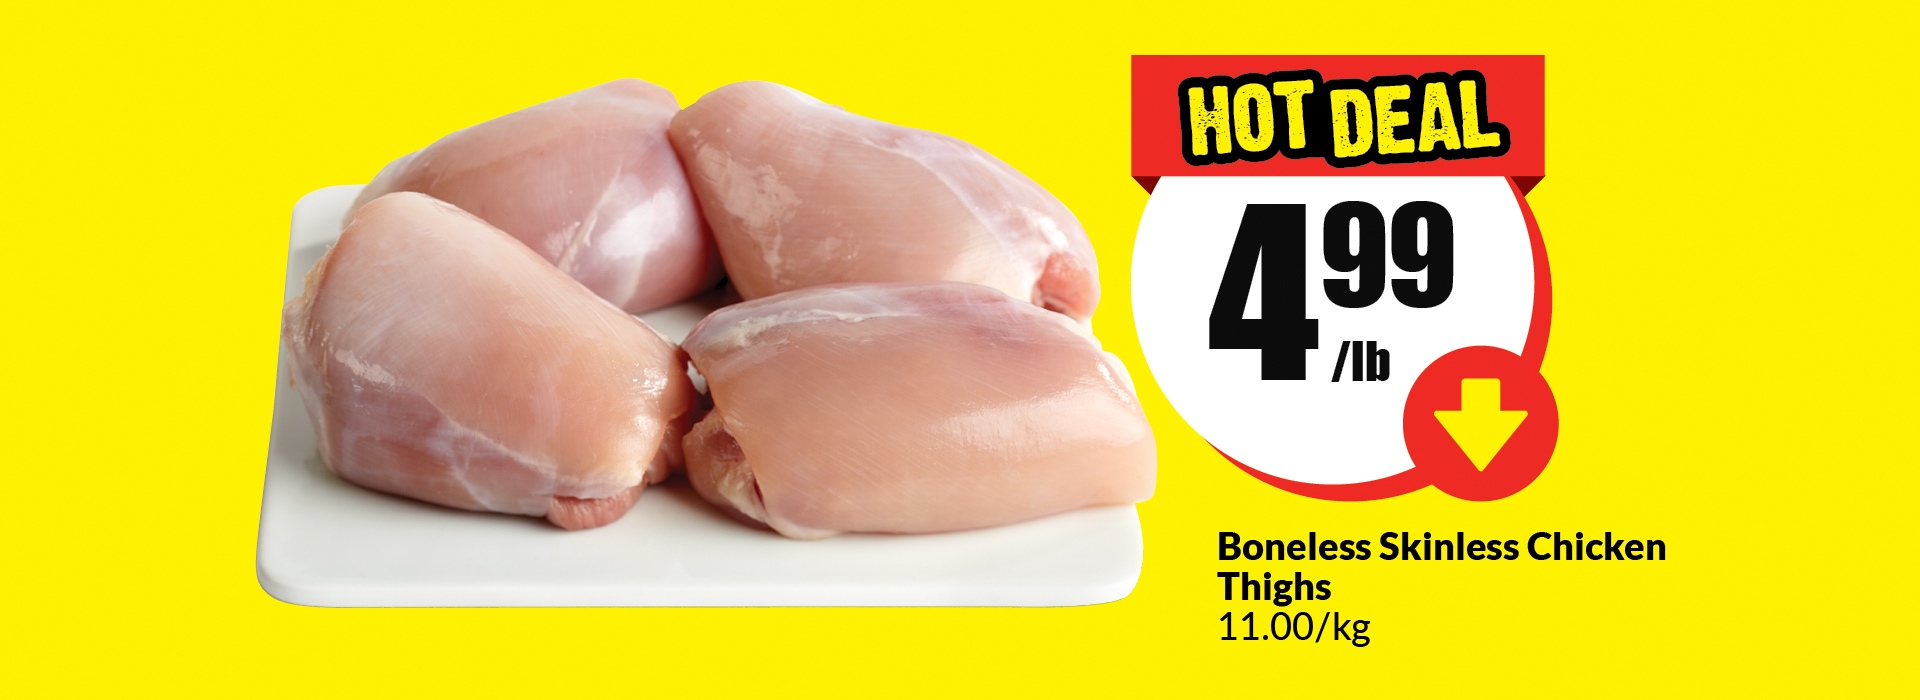 The following image contains the text, "Boneless skinless chicken thighs 11.00/kg. Get this hot deal at just $4.99/lb."